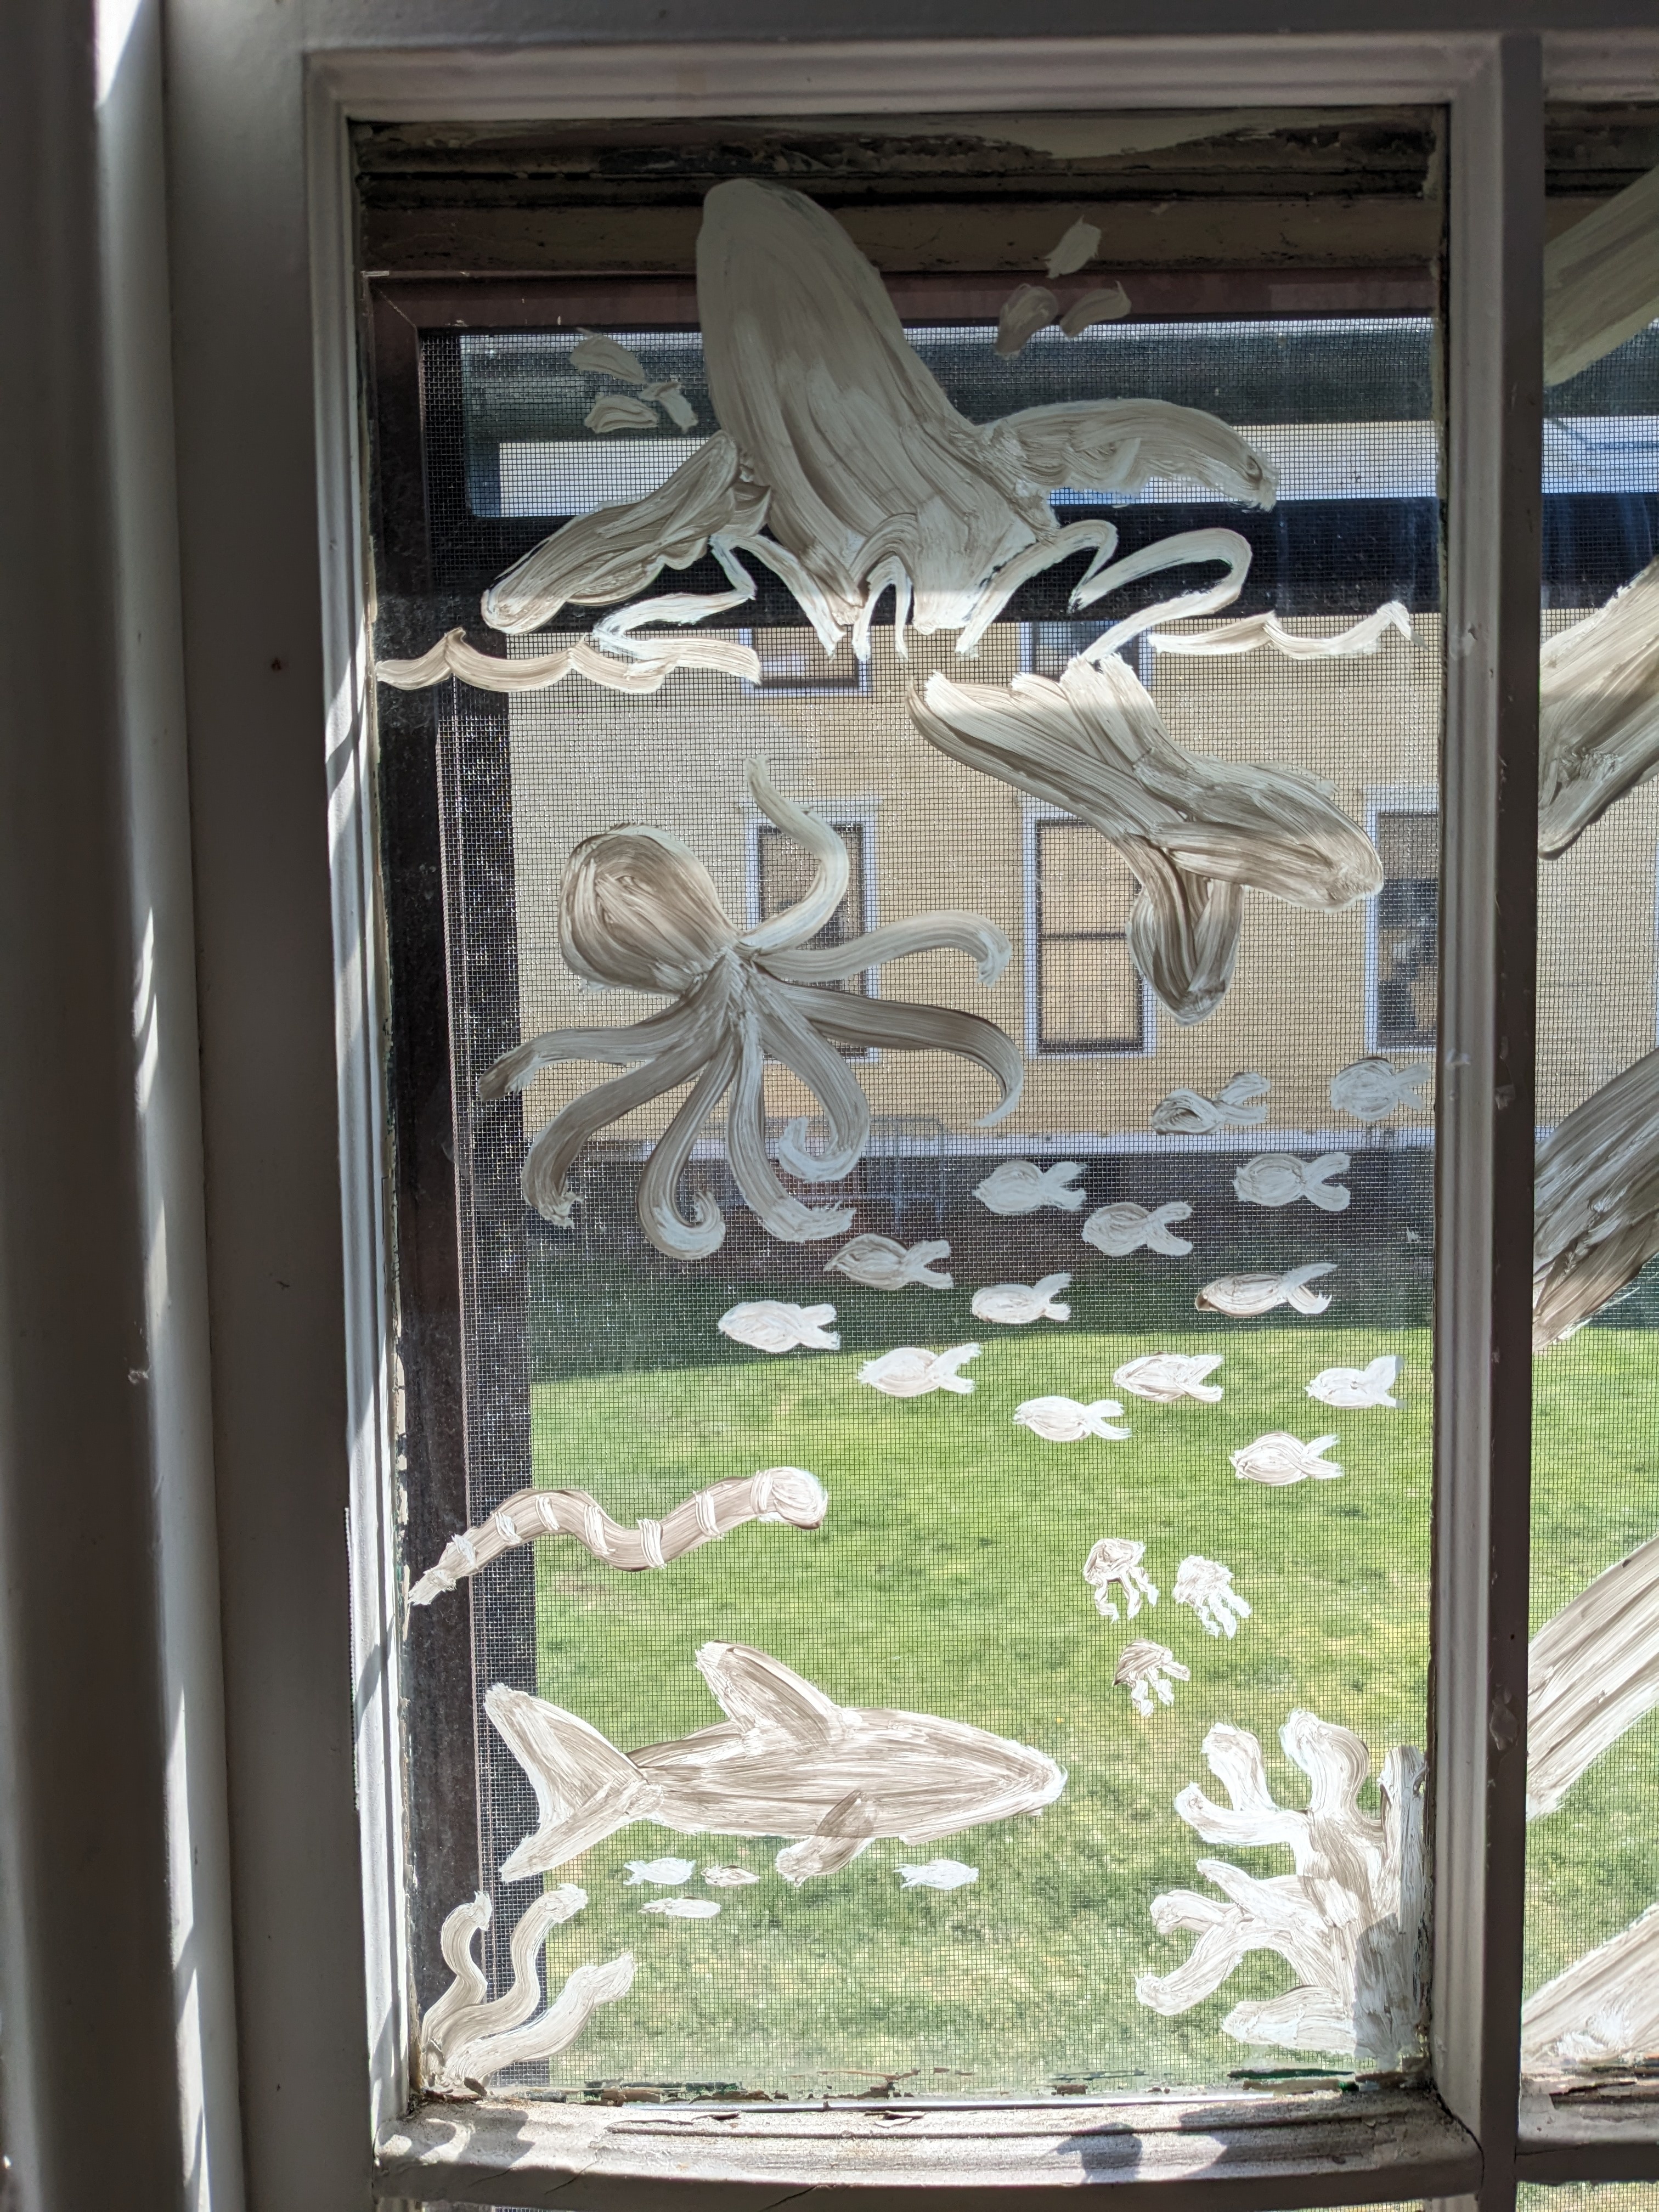 An image of a window pane of NYC Audubon's seasonal environmental center on Governors Island. It is decorated with images of marine life using acrylic paint.